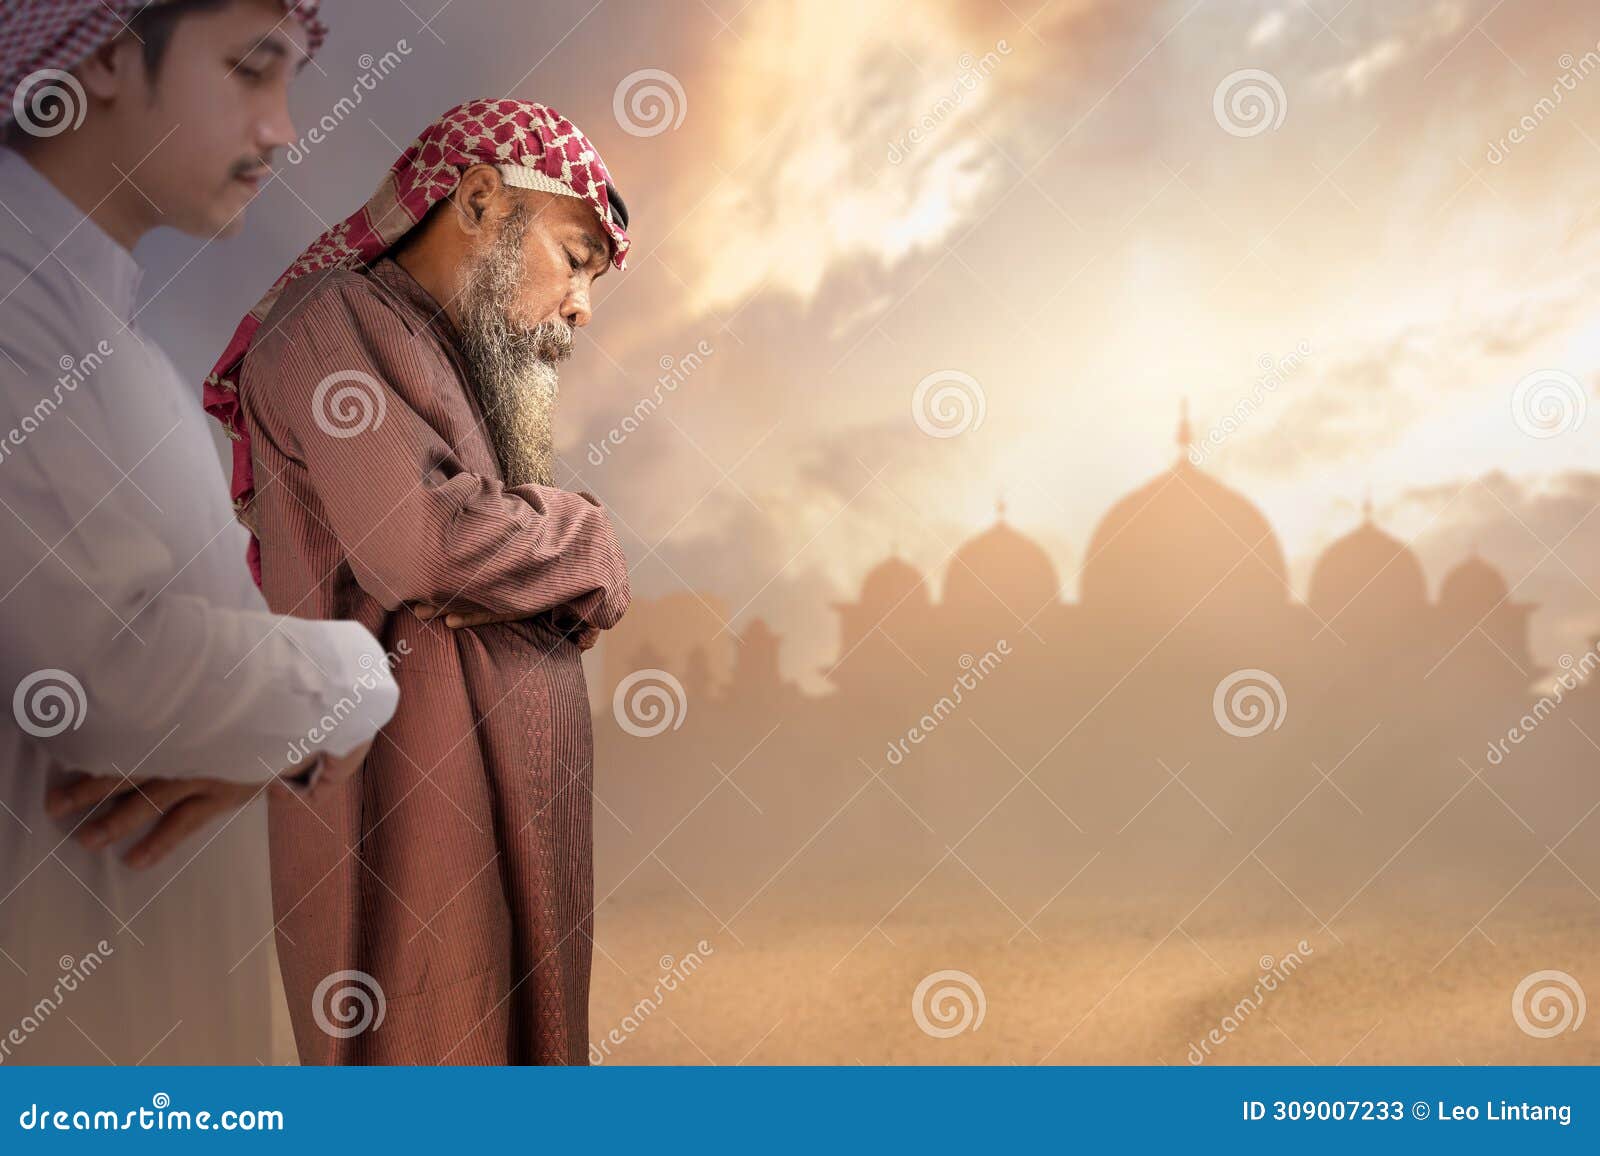 two muslim men with agal in a praying position (salat